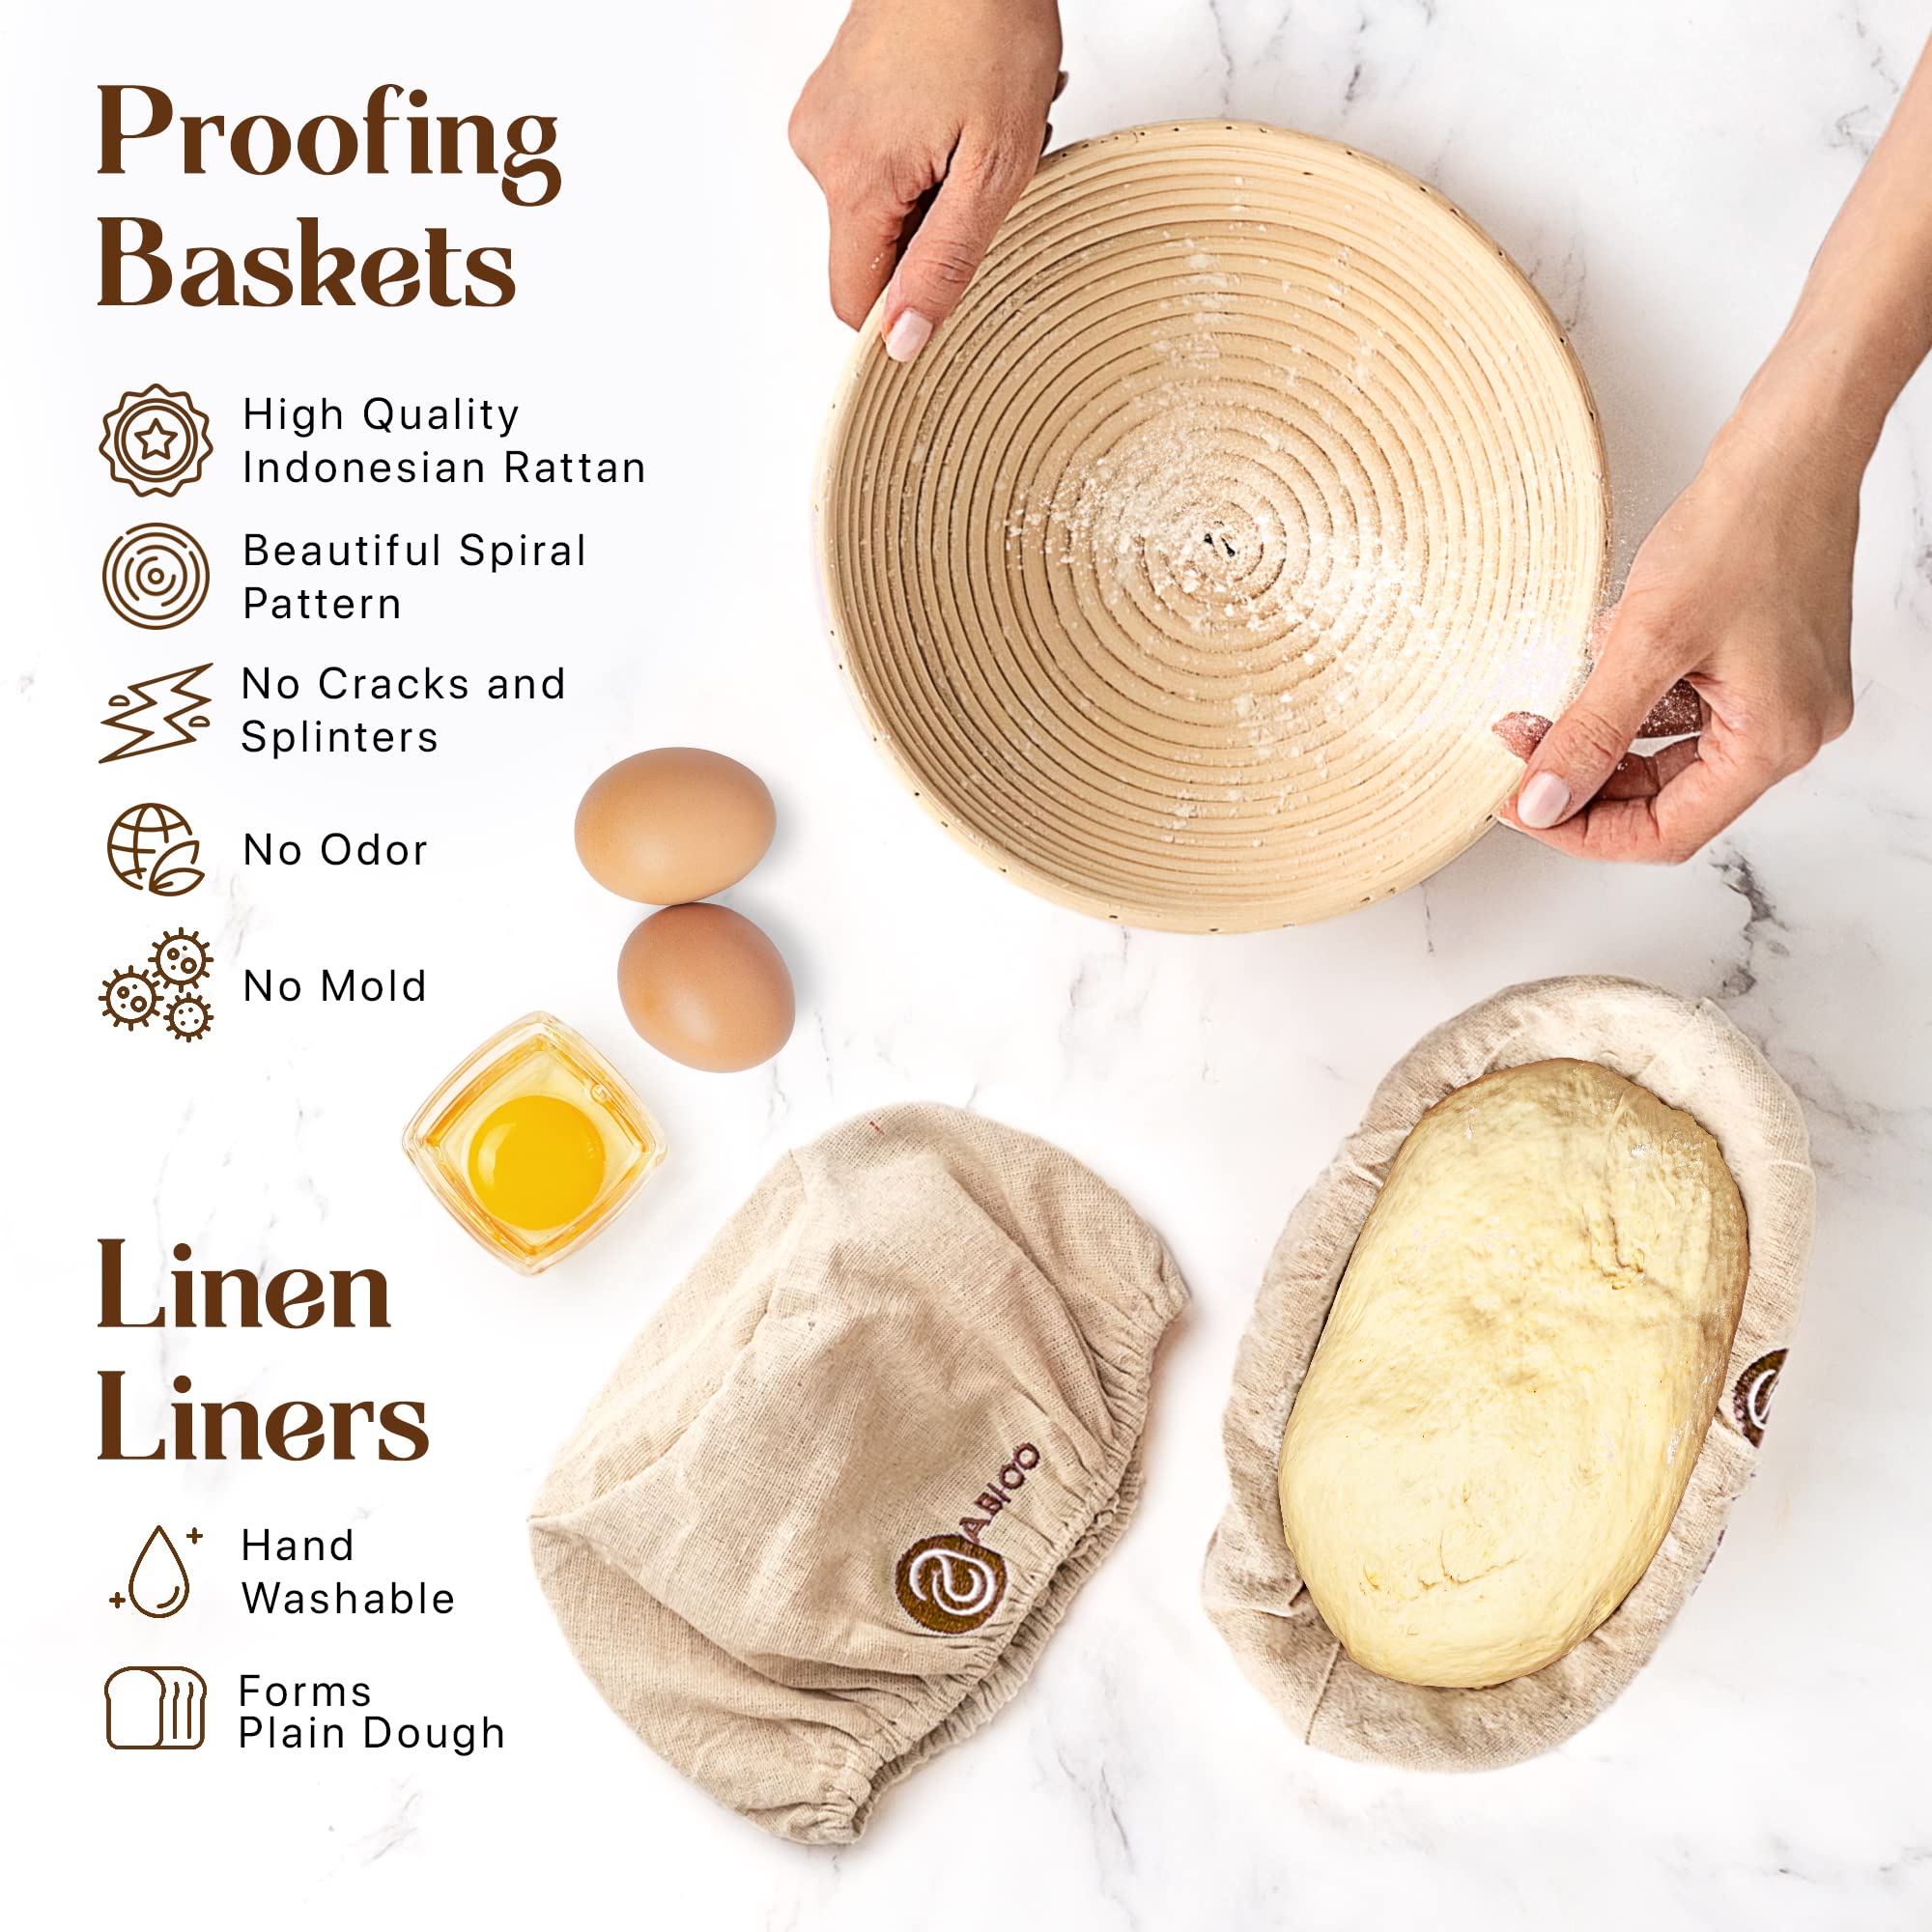 Banneton Bread Proofing Basket Set of 2 with Sourdough Bread Baking Supplies - A Complete Bread Making Kit Including 9